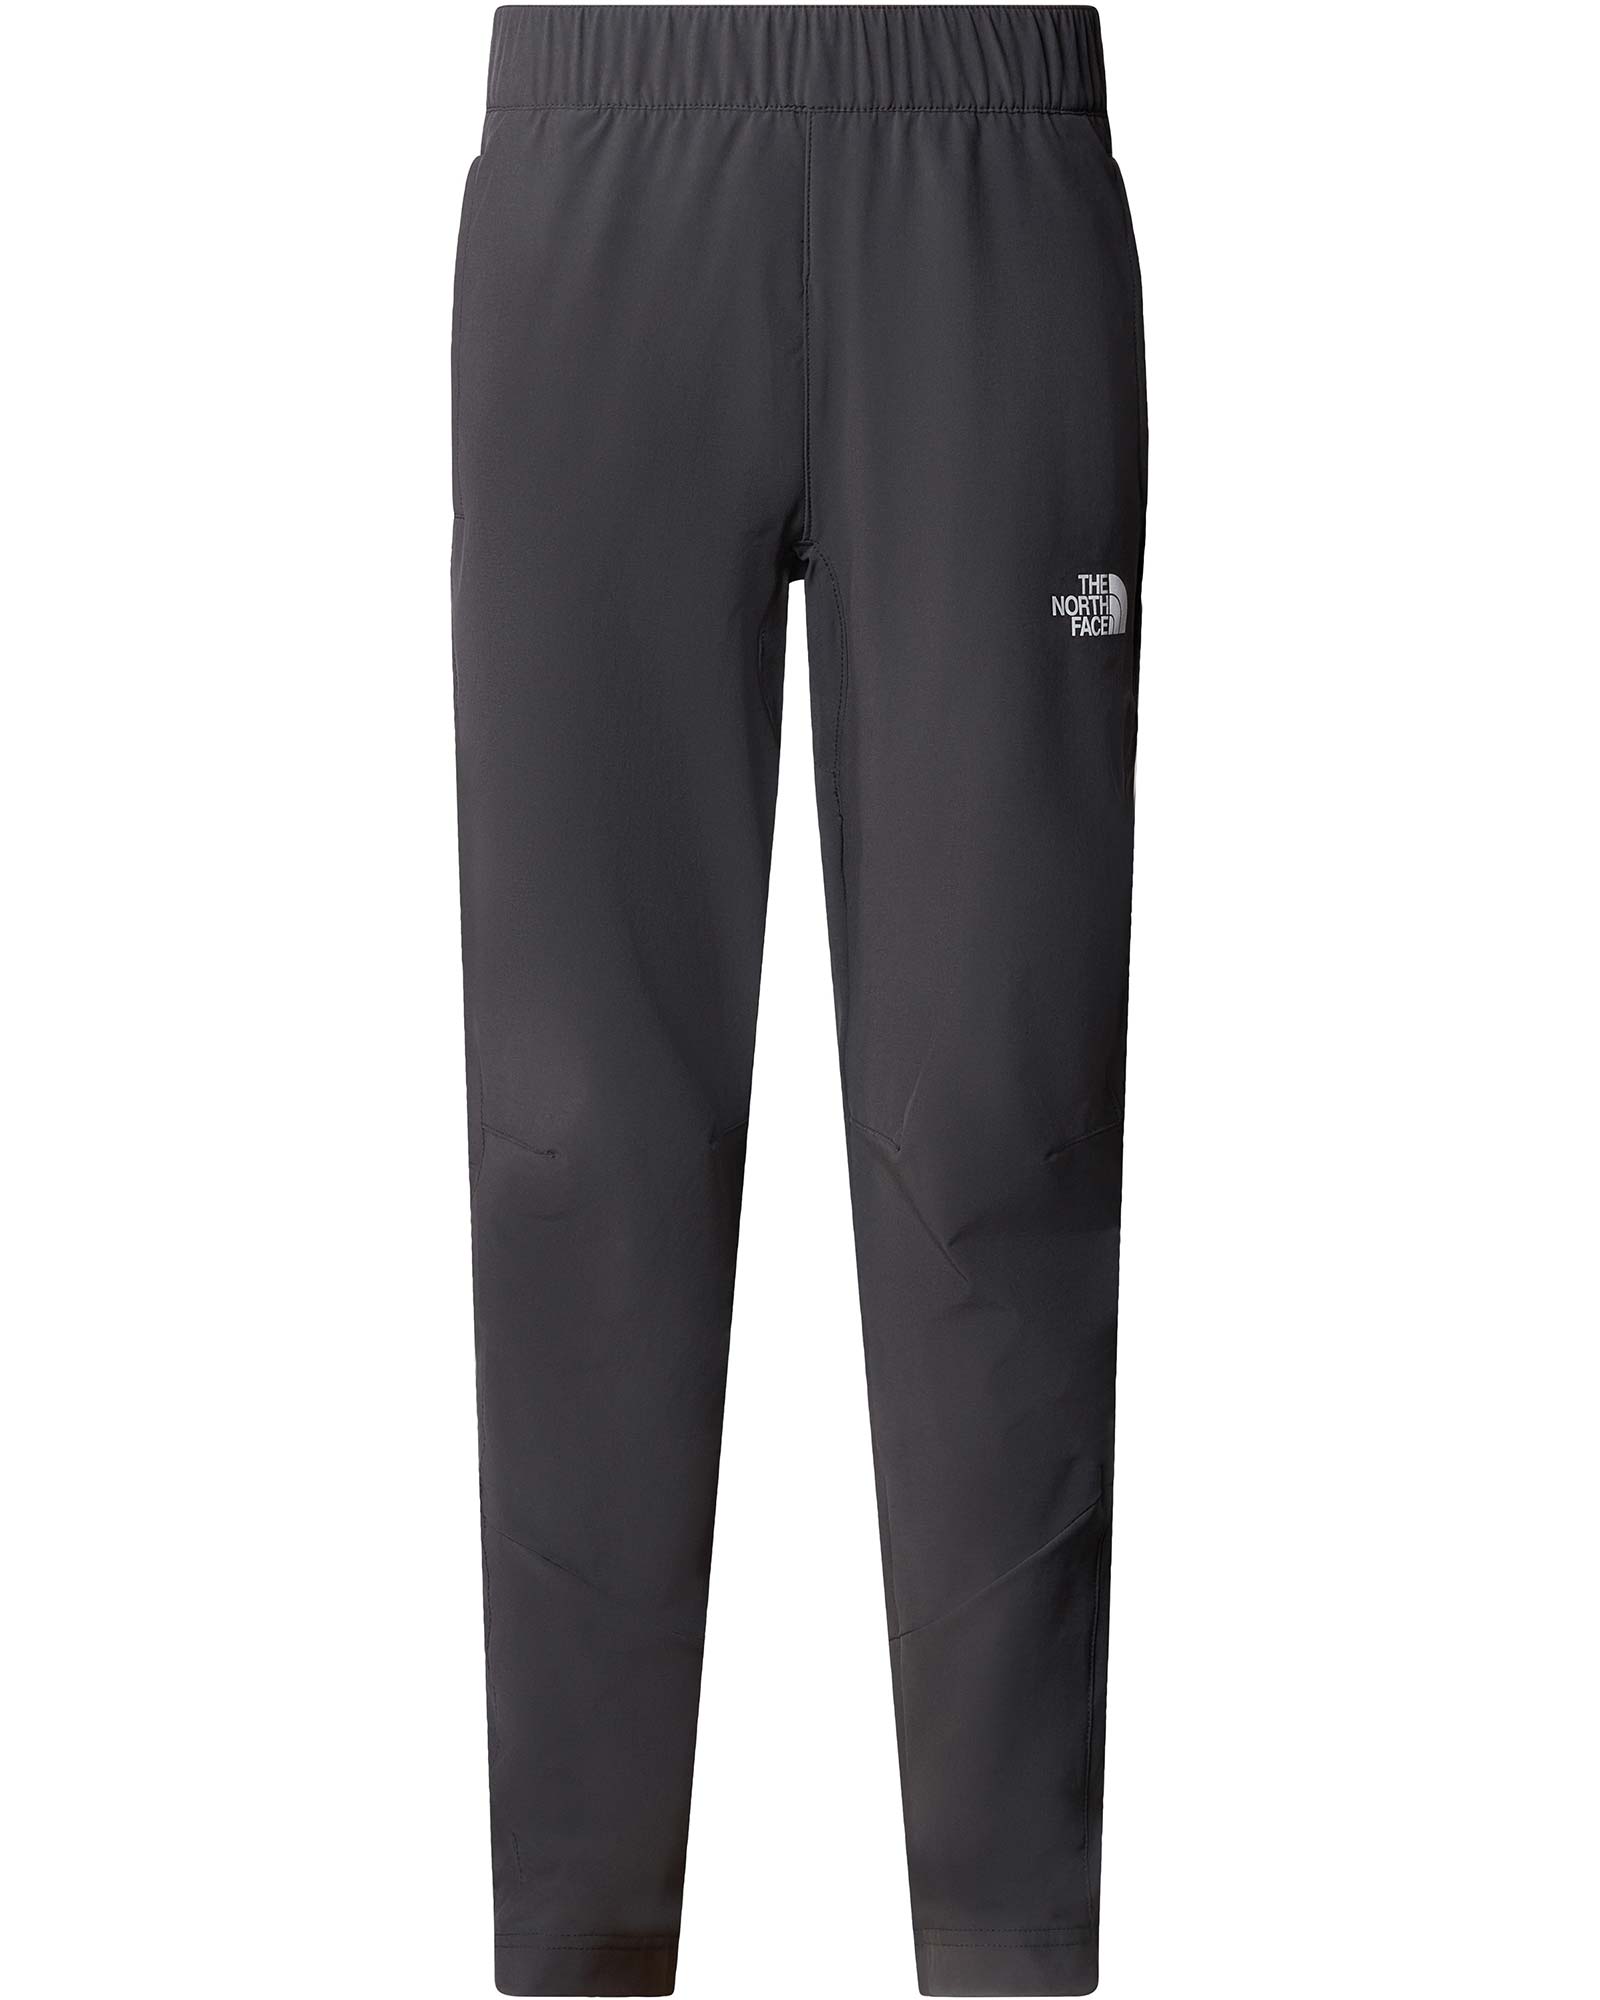 The North Face Boy's Exploration Trousers